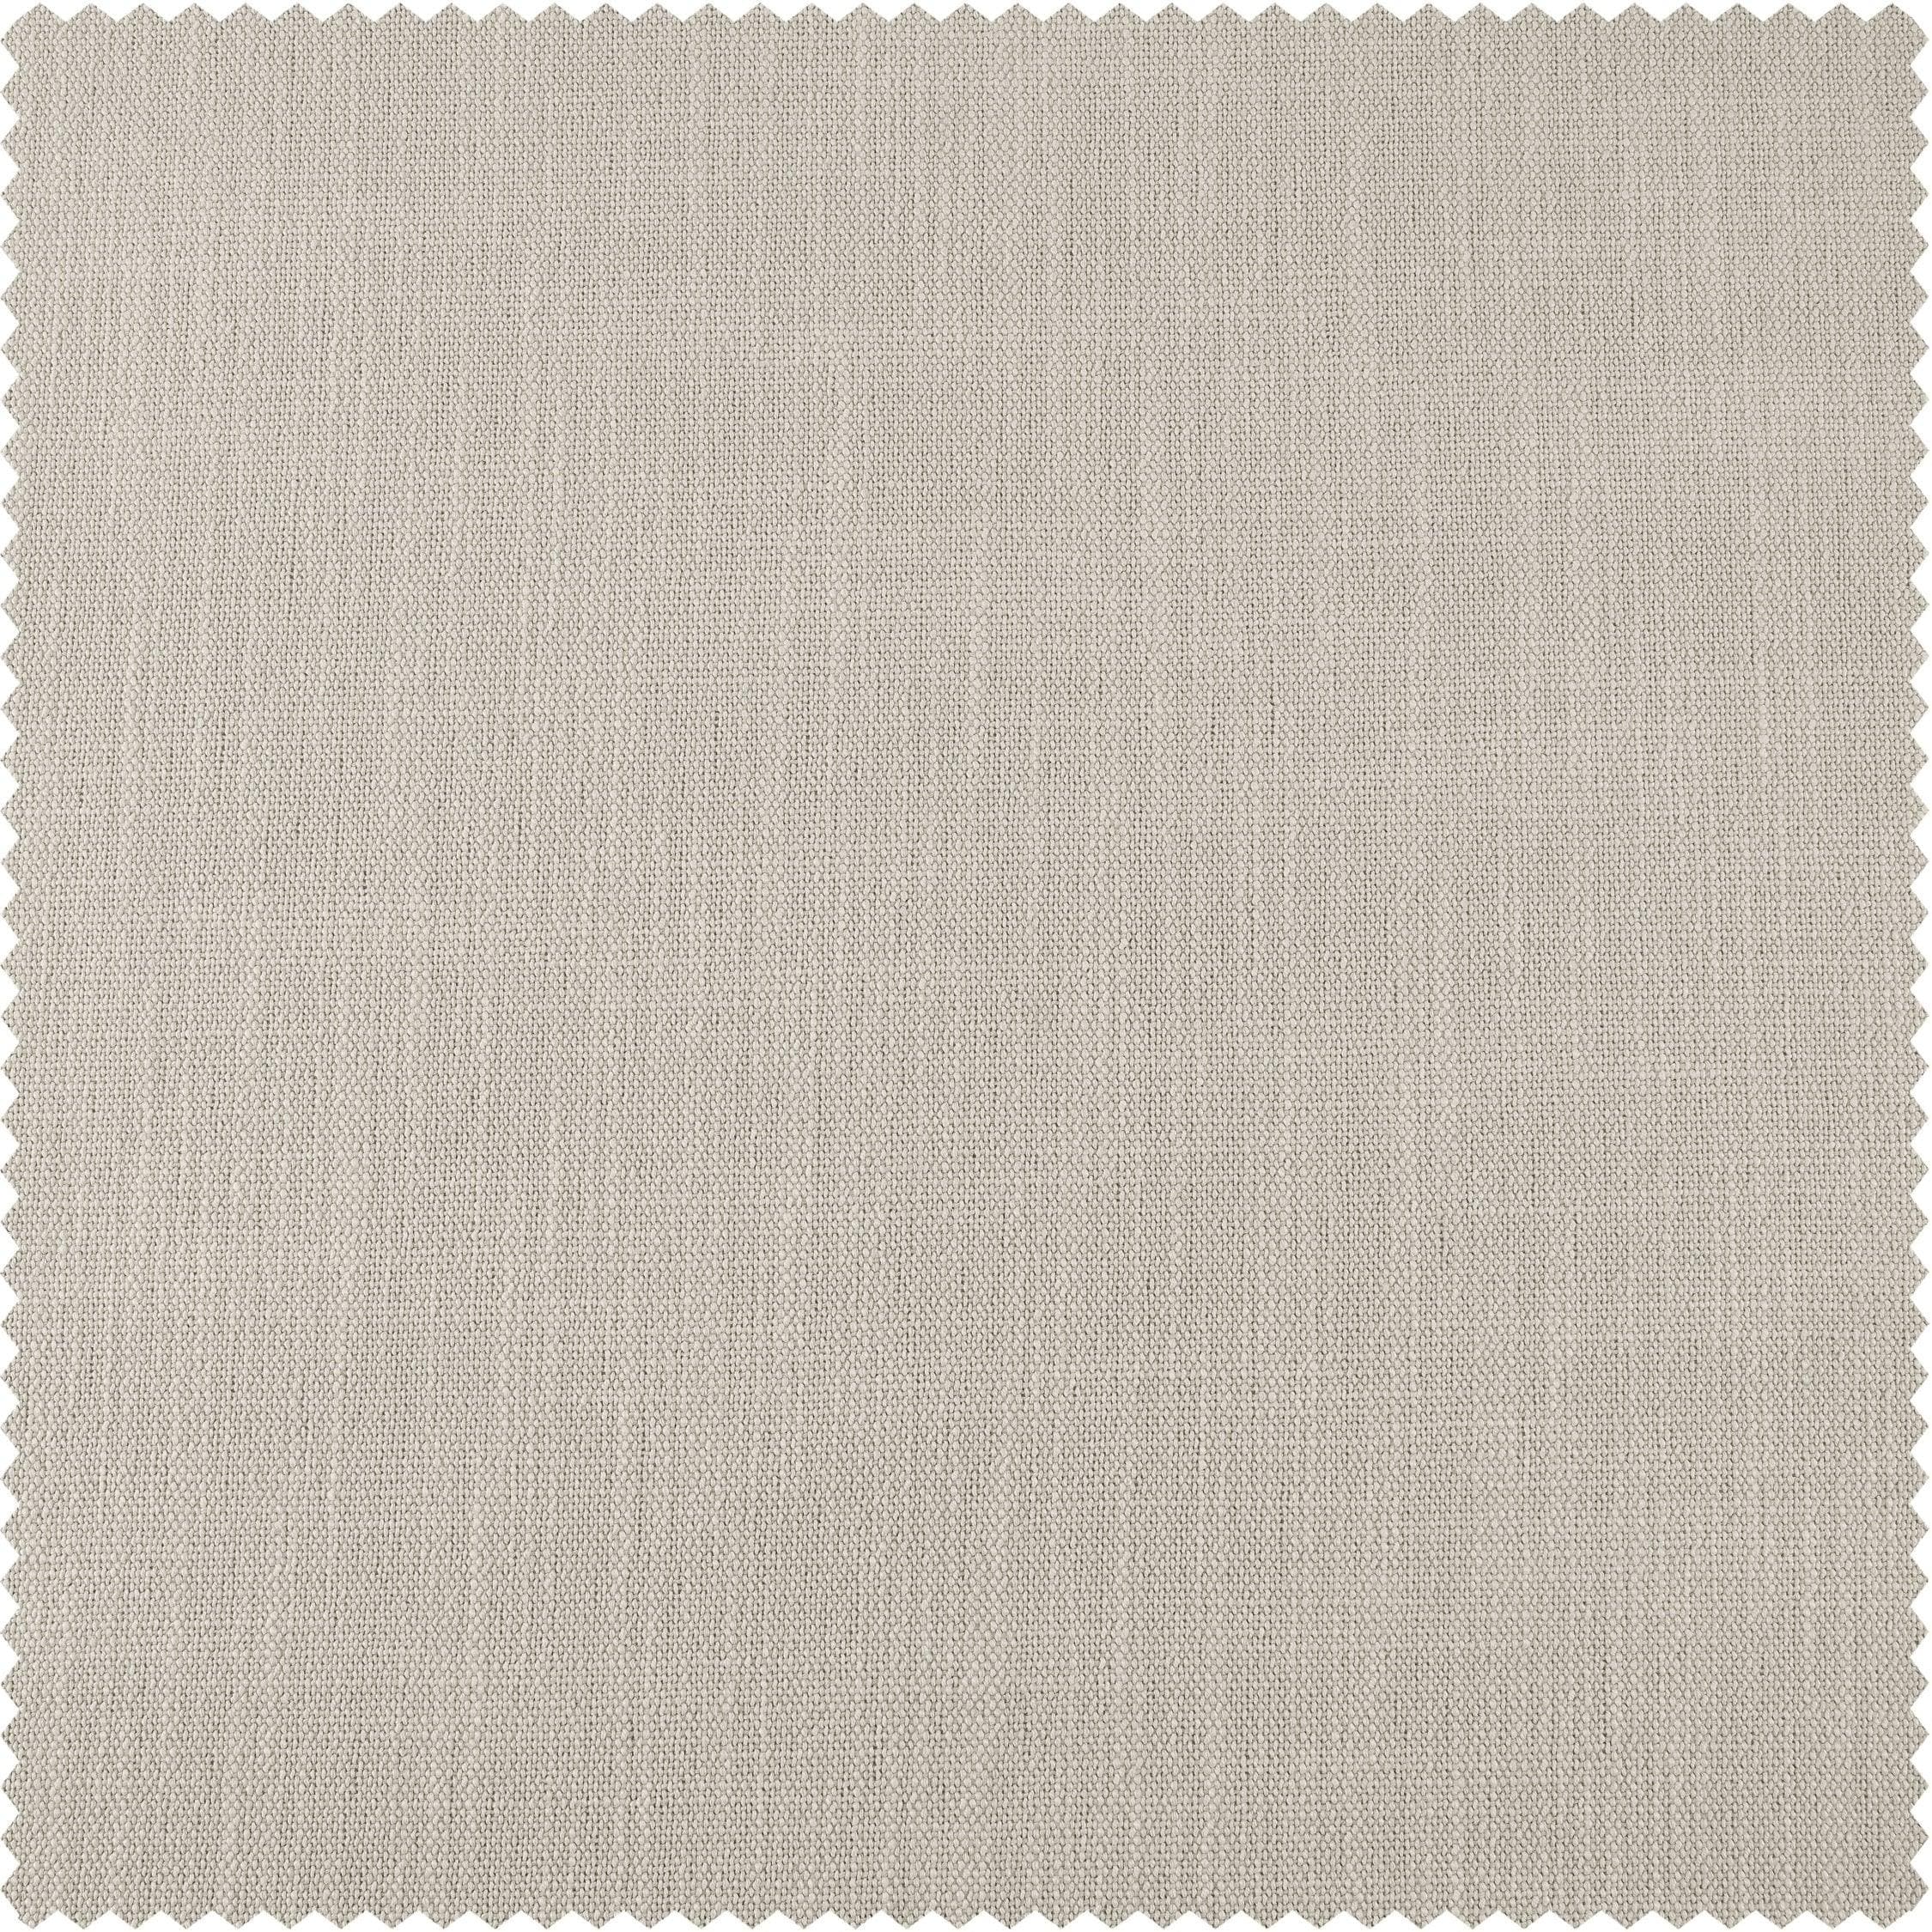 Country Cream Pebble Weave Faux Linen Swatch